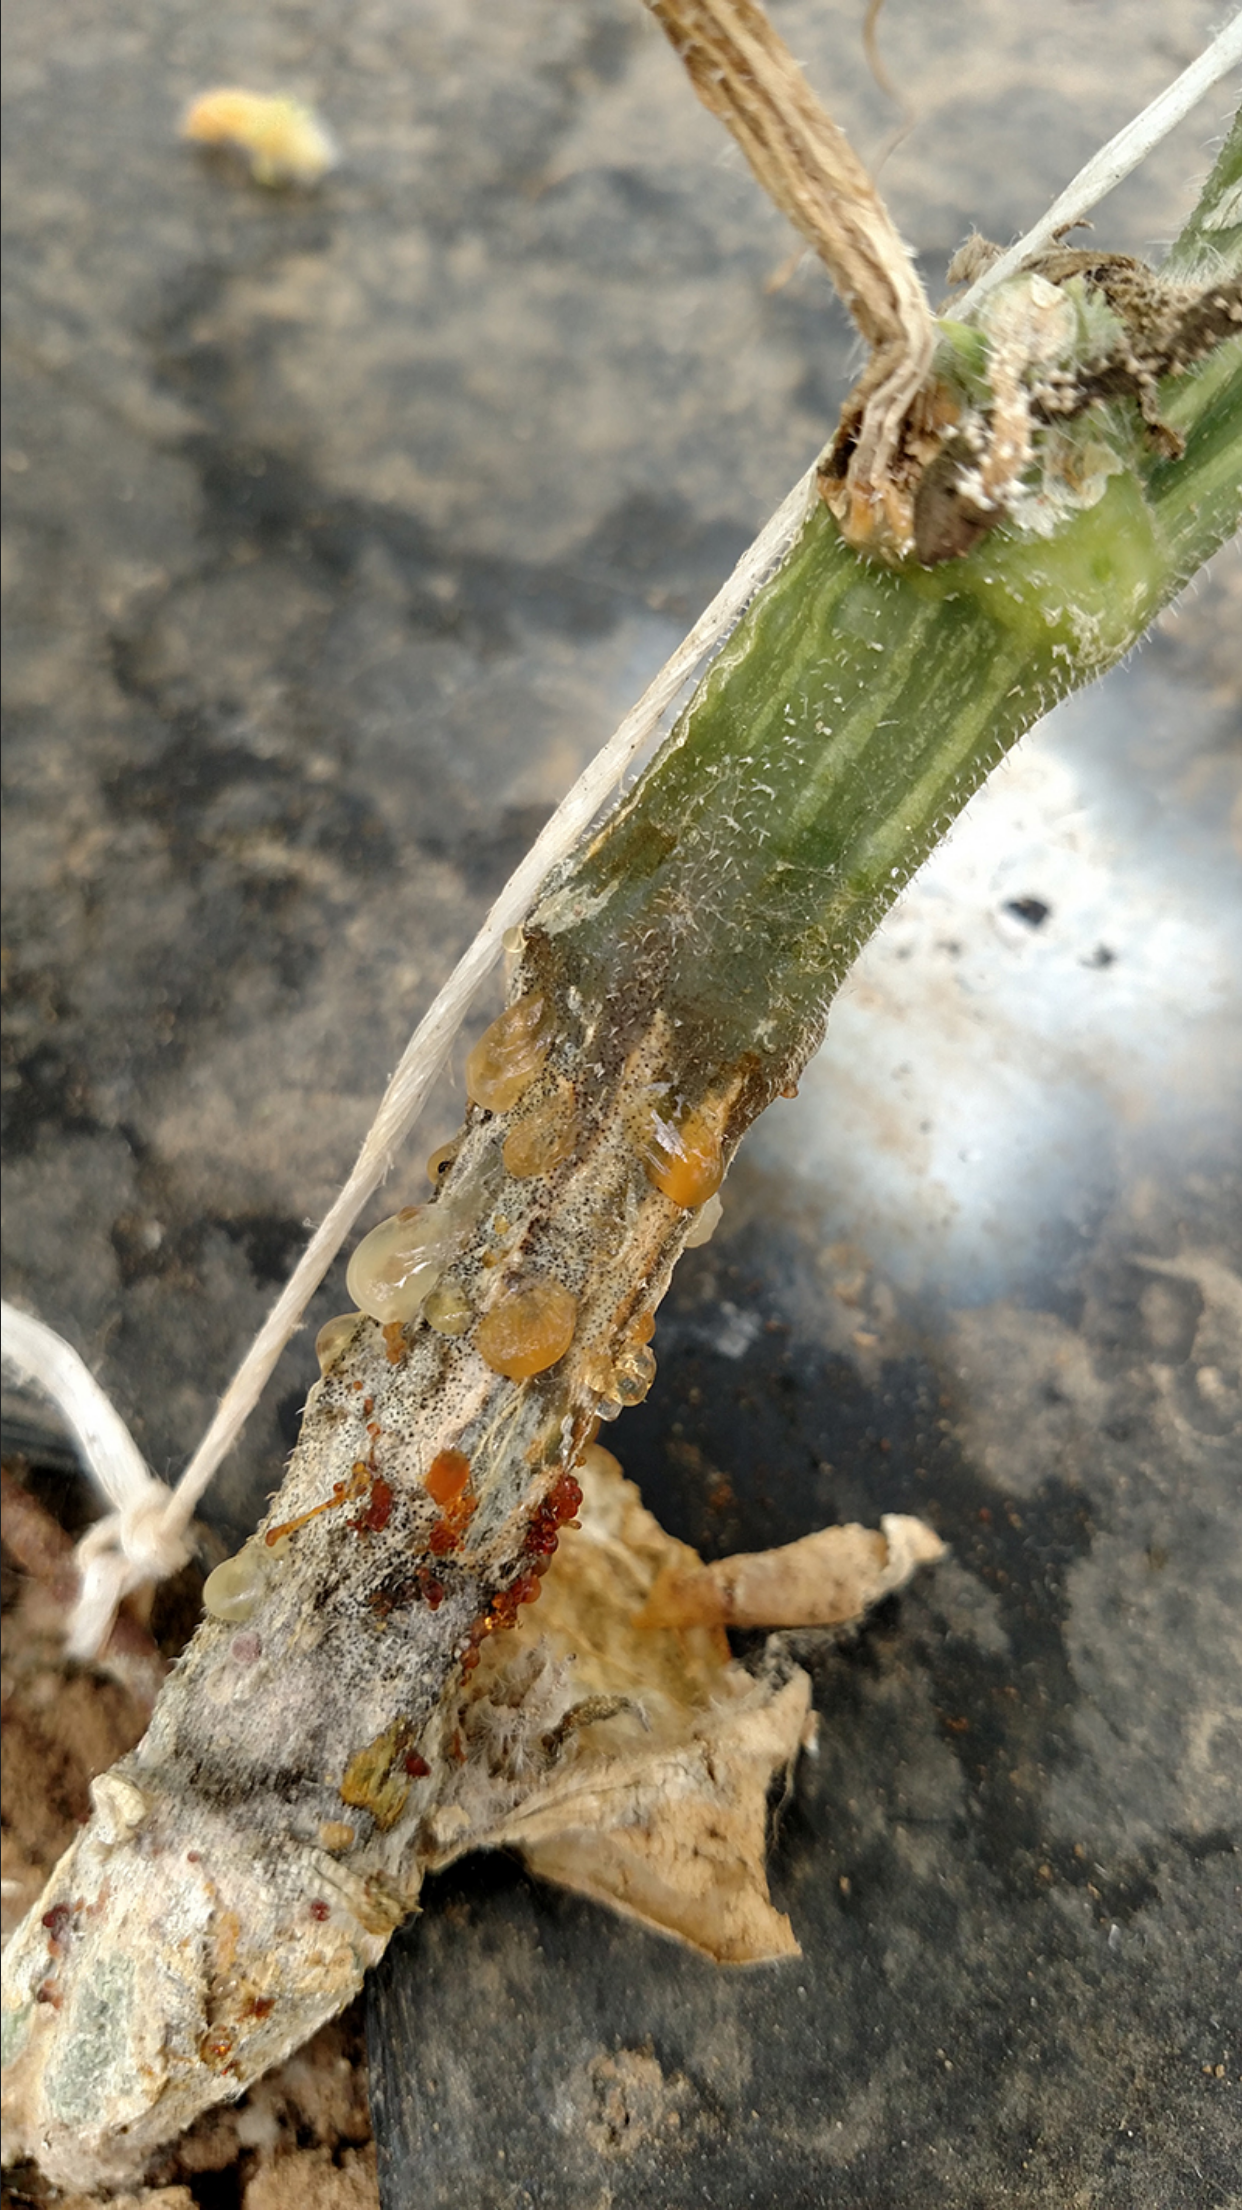 light brown necrotic area at the base of the cucumber stem